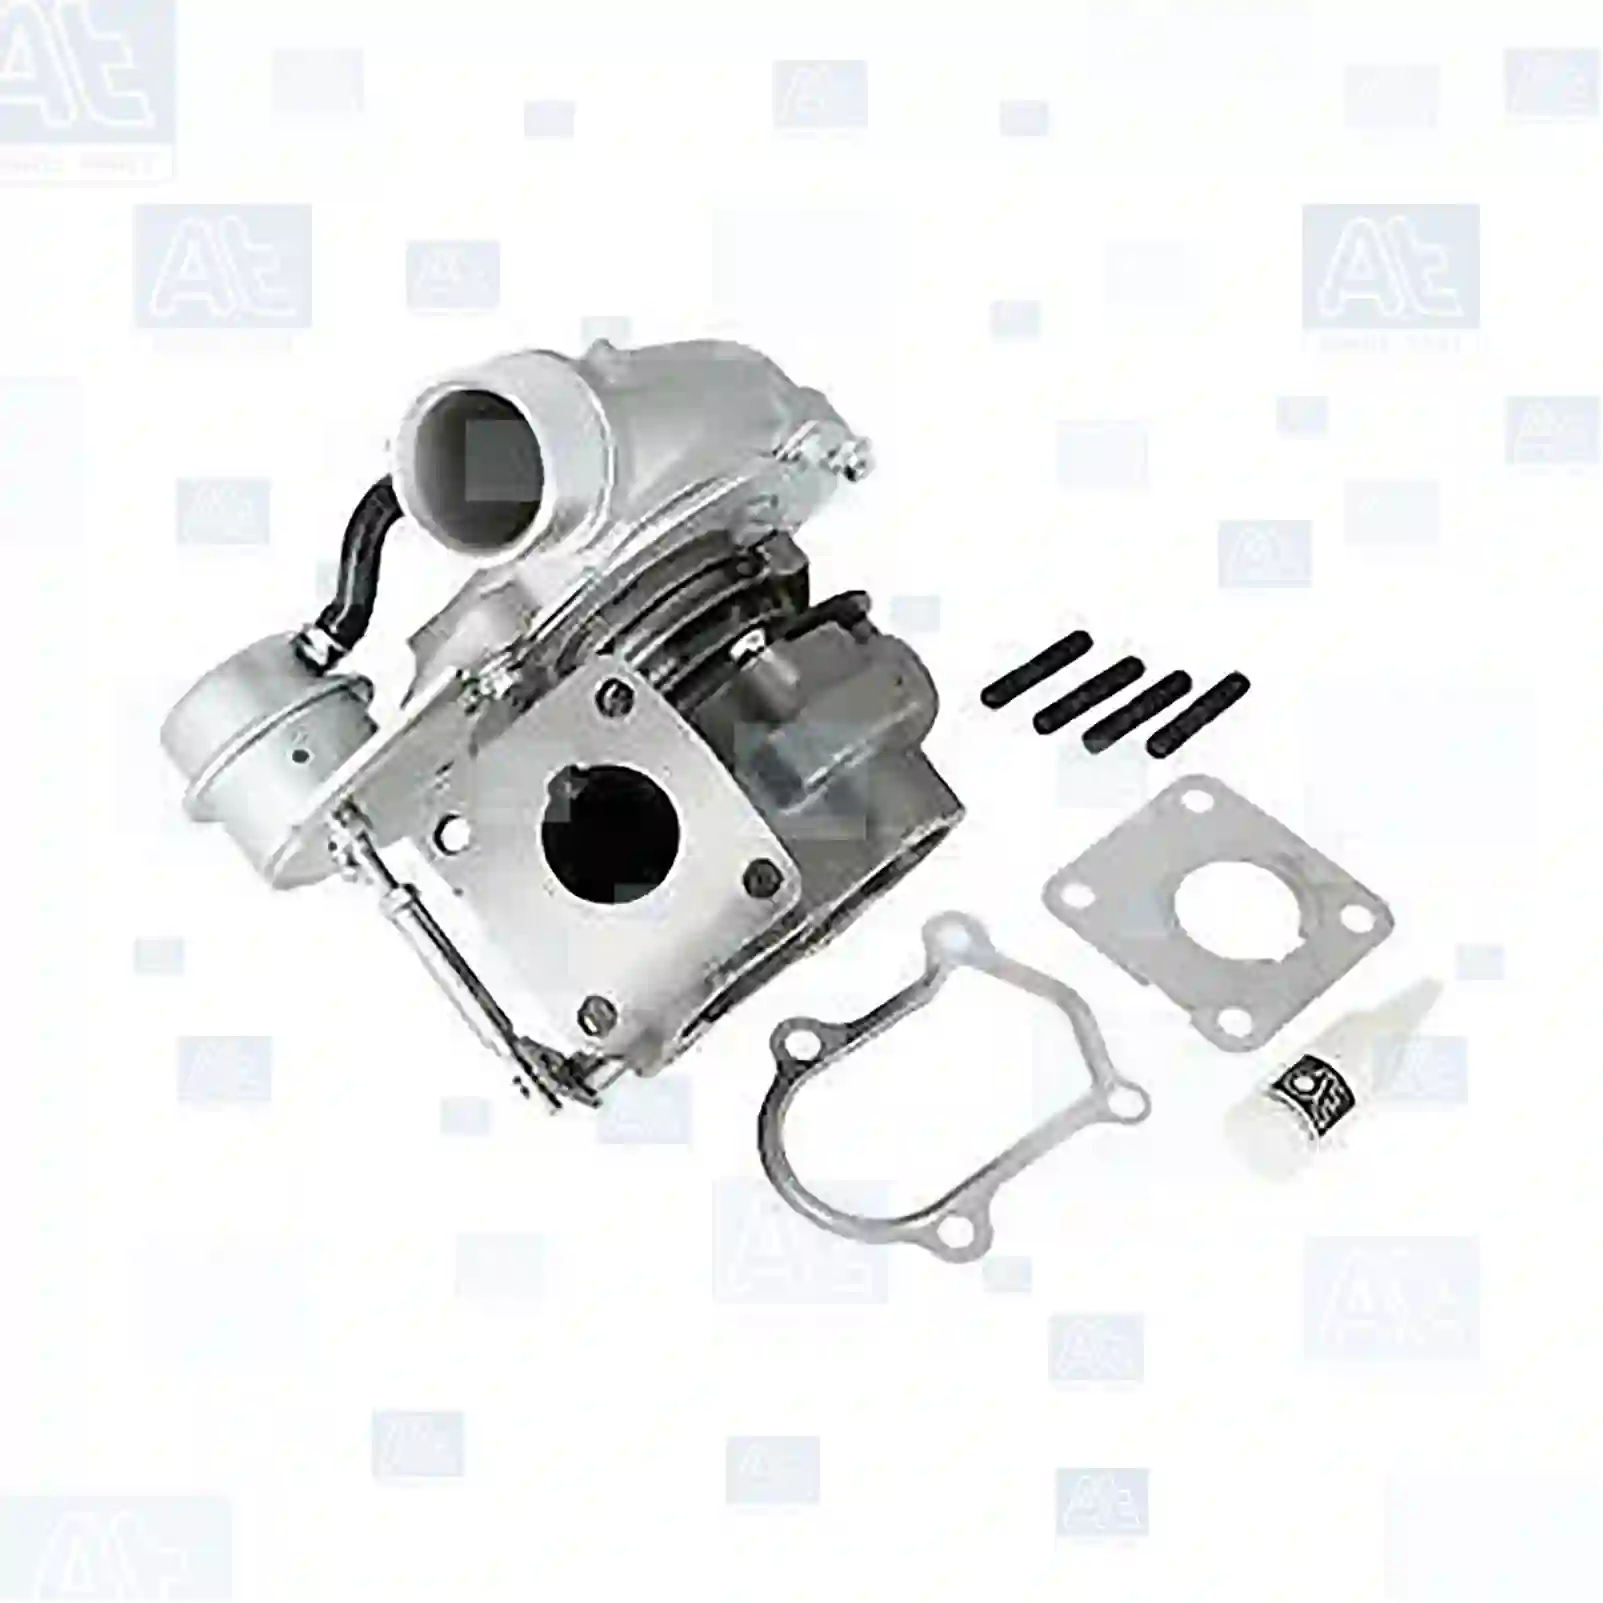 Turbocharger, without gasket kit, 77700344, 0375F6, 0962143720, 04500939, 4500939, 46234479, 500314776, 500344800, 500344801, 500364493, 500385898, 71723501, 71723503, 71723558, 71723560, 962143720, 99460981, 99466793, 71723558, 9161239, 93184040, 99460981, 500321799, 500344801, 500385898, 99450704, 99460981, 99466793, 4500939, 860077, 0375F6, 0962143720, 0004500939, 0009161239, 5001859132, 7701044612, 7711135840 ||  77700344 At Spare Part | Engine, Accelerator Pedal, Camshaft, Connecting Rod, Crankcase, Crankshaft, Cylinder Head, Engine Suspension Mountings, Exhaust Manifold, Exhaust Gas Recirculation, Filter Kits, Flywheel Housing, General Overhaul Kits, Engine, Intake Manifold, Oil Cleaner, Oil Cooler, Oil Filter, Oil Pump, Oil Sump, Piston & Liner, Sensor & Switch, Timing Case, Turbocharger, Cooling System, Belt Tensioner, Coolant Filter, Coolant Pipe, Corrosion Prevention Agent, Drive, Expansion Tank, Fan, Intercooler, Monitors & Gauges, Radiator, Thermostat, V-Belt / Timing belt, Water Pump, Fuel System, Electronical Injector Unit, Feed Pump, Fuel Filter, cpl., Fuel Gauge Sender,  Fuel Line, Fuel Pump, Fuel Tank, Injection Line Kit, Injection Pump, Exhaust System, Clutch & Pedal, Gearbox, Propeller Shaft, Axles, Brake System, Hubs & Wheels, Suspension, Leaf Spring, Universal Parts / Accessories, Steering, Electrical System, Cabin Turbocharger, without gasket kit, 77700344, 0375F6, 0962143720, 04500939, 4500939, 46234479, 500314776, 500344800, 500344801, 500364493, 500385898, 71723501, 71723503, 71723558, 71723560, 962143720, 99460981, 99466793, 71723558, 9161239, 93184040, 99460981, 500321799, 500344801, 500385898, 99450704, 99460981, 99466793, 4500939, 860077, 0375F6, 0962143720, 0004500939, 0009161239, 5001859132, 7701044612, 7711135840 ||  77700344 At Spare Part | Engine, Accelerator Pedal, Camshaft, Connecting Rod, Crankcase, Crankshaft, Cylinder Head, Engine Suspension Mountings, Exhaust Manifold, Exhaust Gas Recirculation, Filter Kits, Flywheel Housing, General Overhaul Kits, Engine, Intake Manifold, Oil Cleaner, Oil Cooler, Oil Filter, Oil Pump, Oil Sump, Piston & Liner, Sensor & Switch, Timing Case, Turbocharger, Cooling System, Belt Tensioner, Coolant Filter, Coolant Pipe, Corrosion Prevention Agent, Drive, Expansion Tank, Fan, Intercooler, Monitors & Gauges, Radiator, Thermostat, V-Belt / Timing belt, Water Pump, Fuel System, Electronical Injector Unit, Feed Pump, Fuel Filter, cpl., Fuel Gauge Sender,  Fuel Line, Fuel Pump, Fuel Tank, Injection Line Kit, Injection Pump, Exhaust System, Clutch & Pedal, Gearbox, Propeller Shaft, Axles, Brake System, Hubs & Wheels, Suspension, Leaf Spring, Universal Parts / Accessories, Steering, Electrical System, Cabin